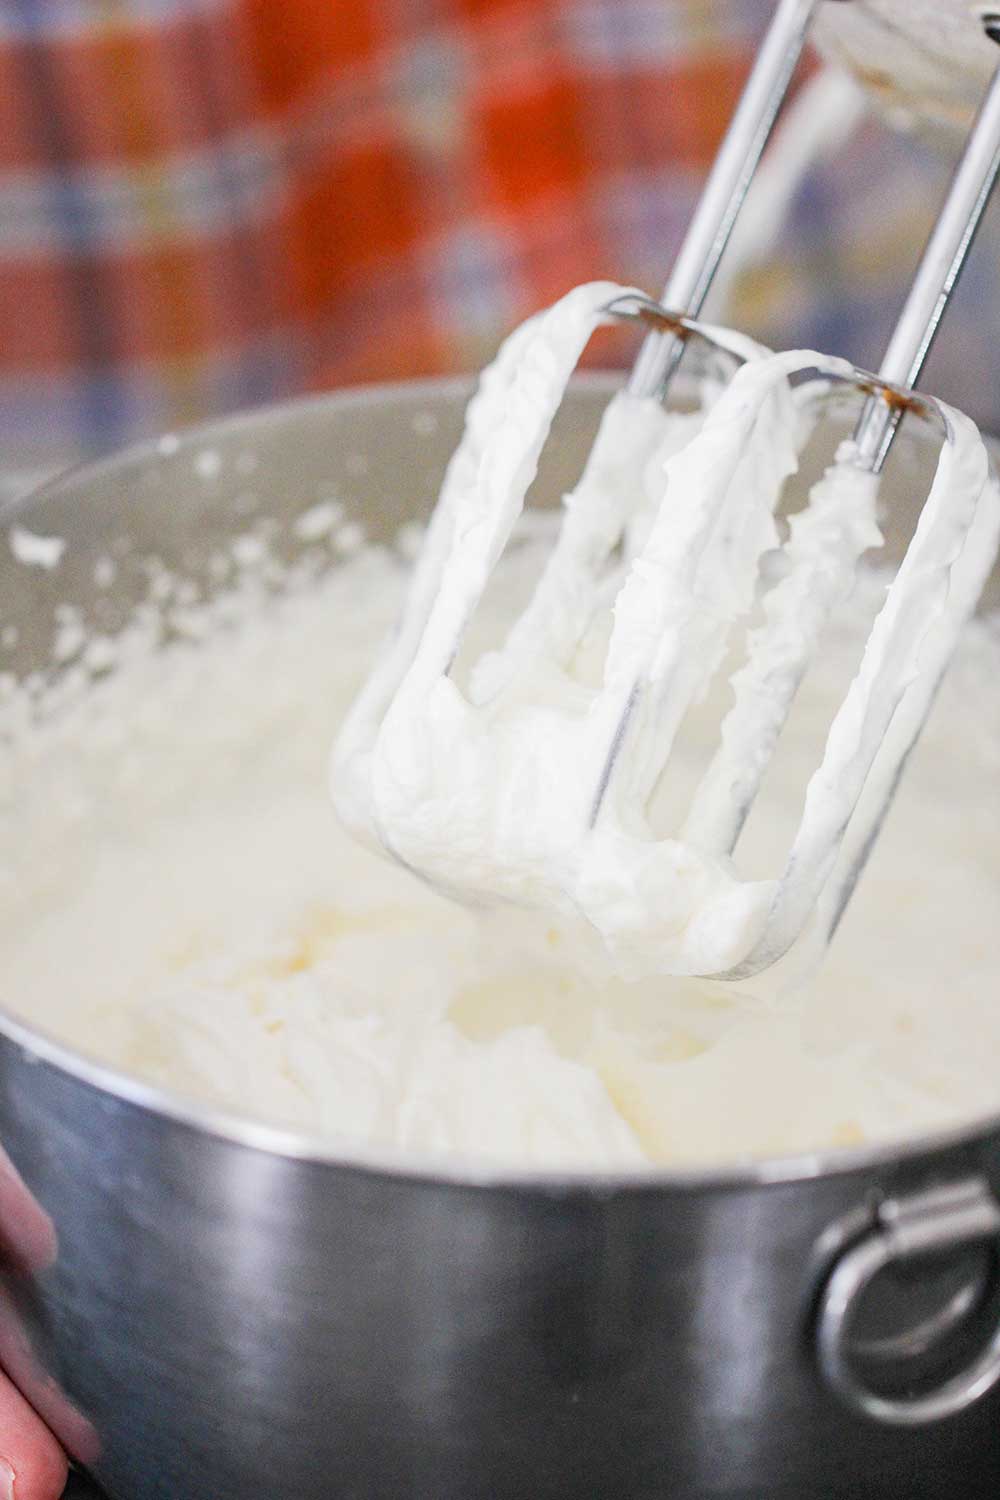 A mixer with whipped cream covering the attachments. 